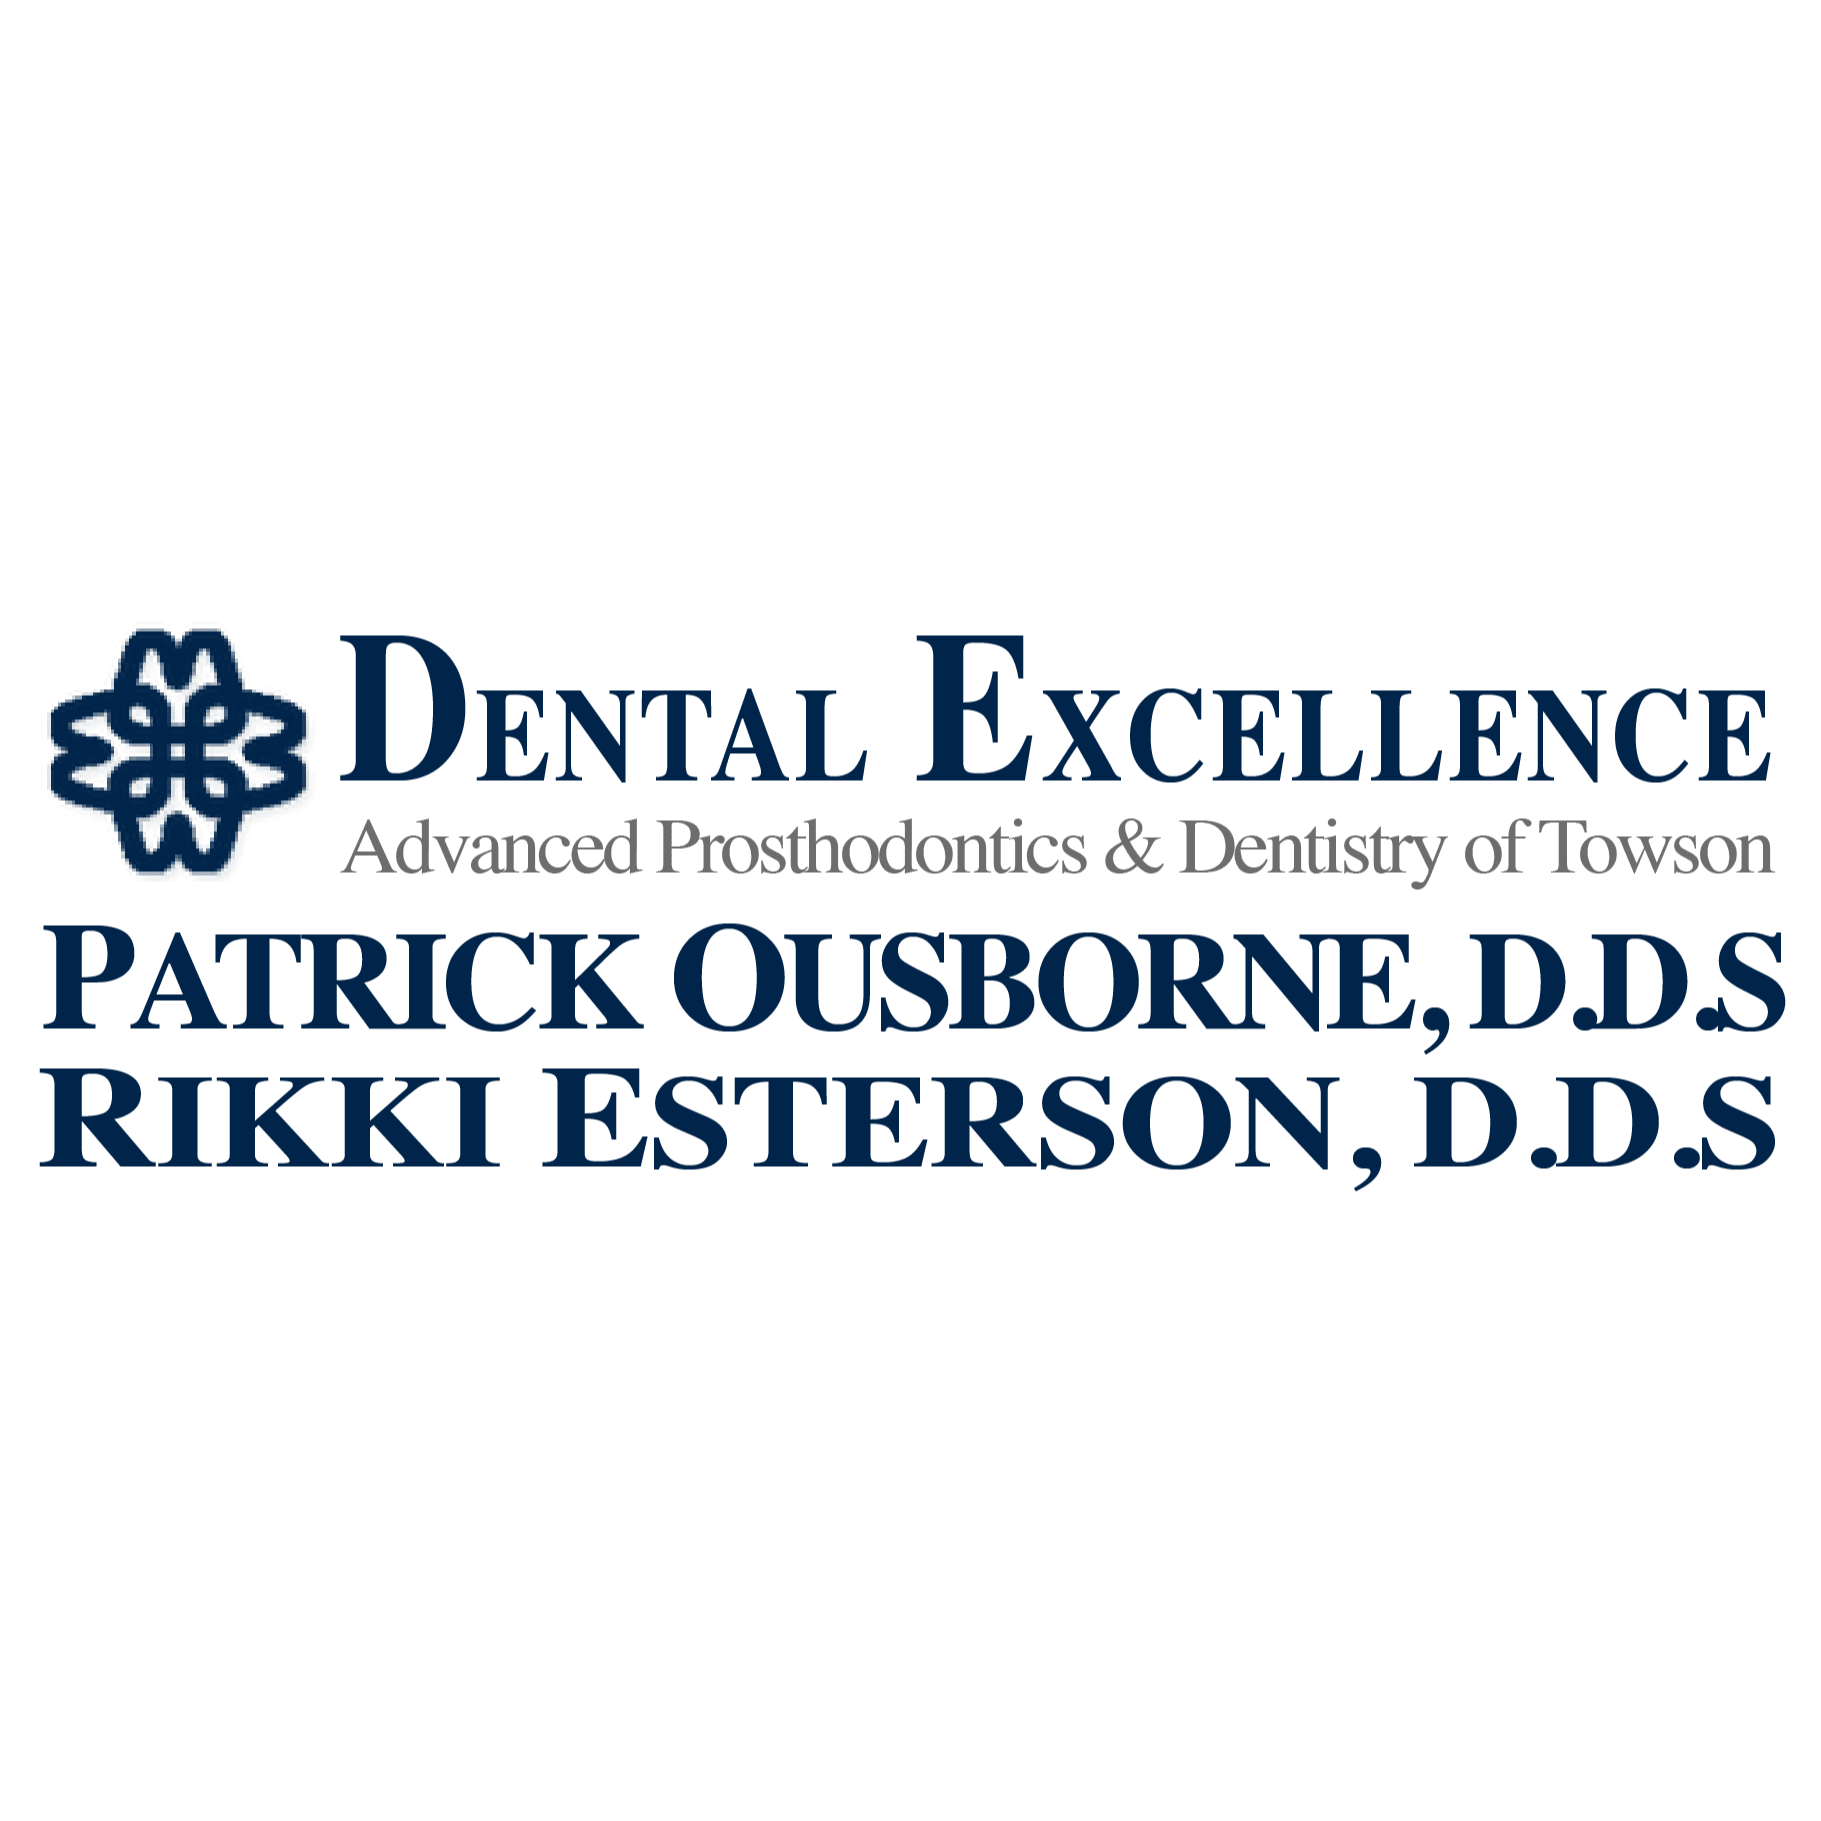 Dental Excellence: Advanced Prosthodontics & Dentistry of Towson